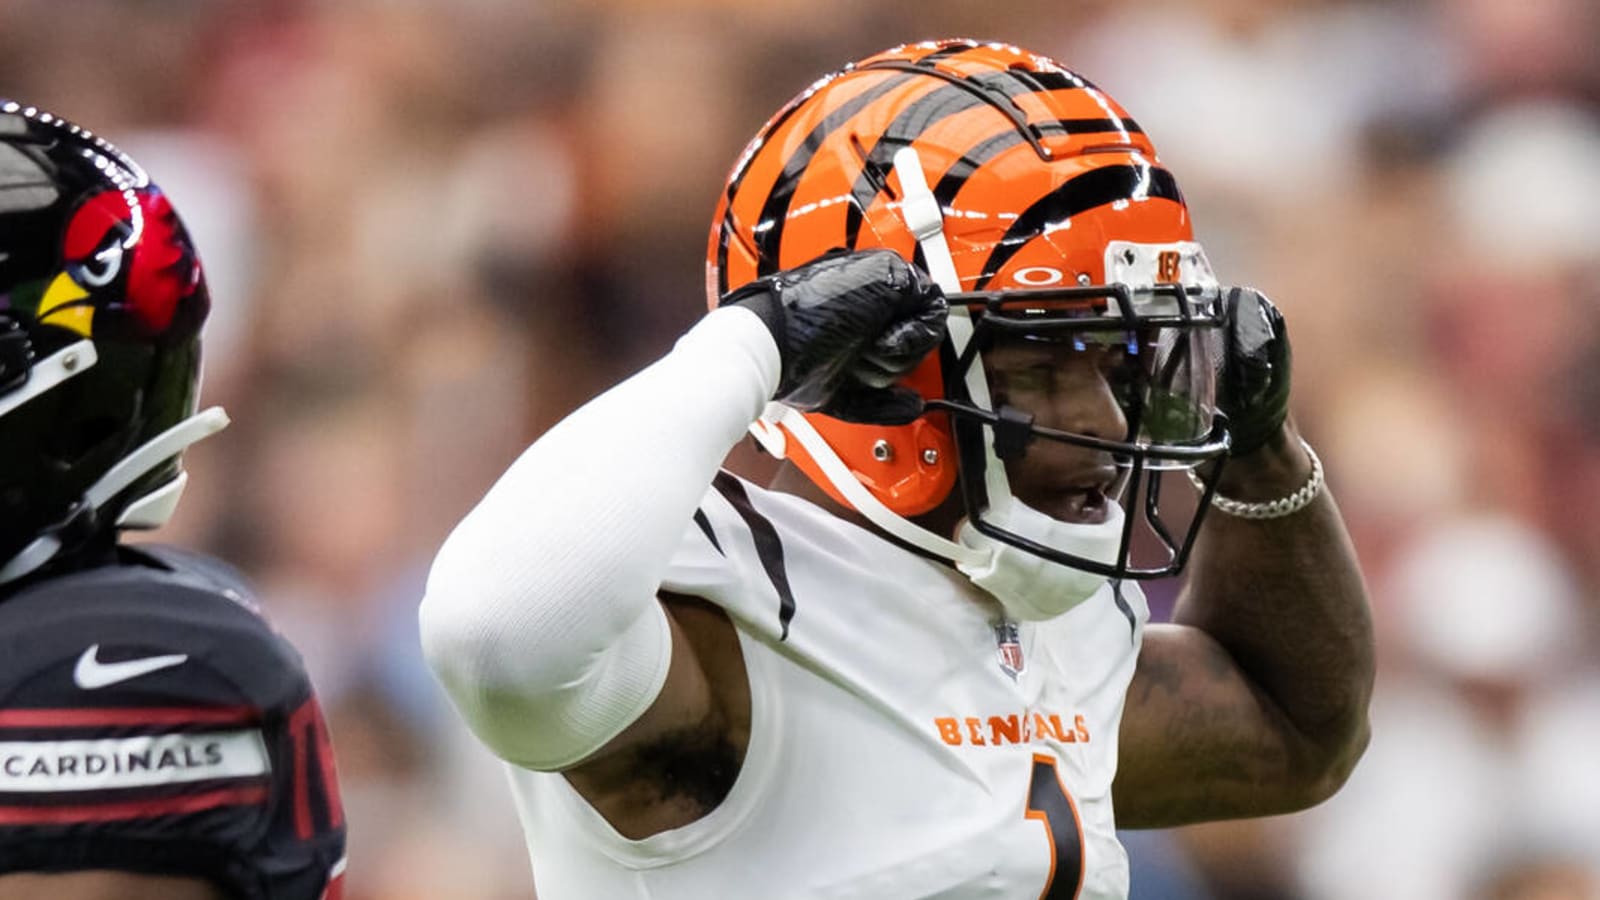 Bengals' Chase sets franchise record with breakout game